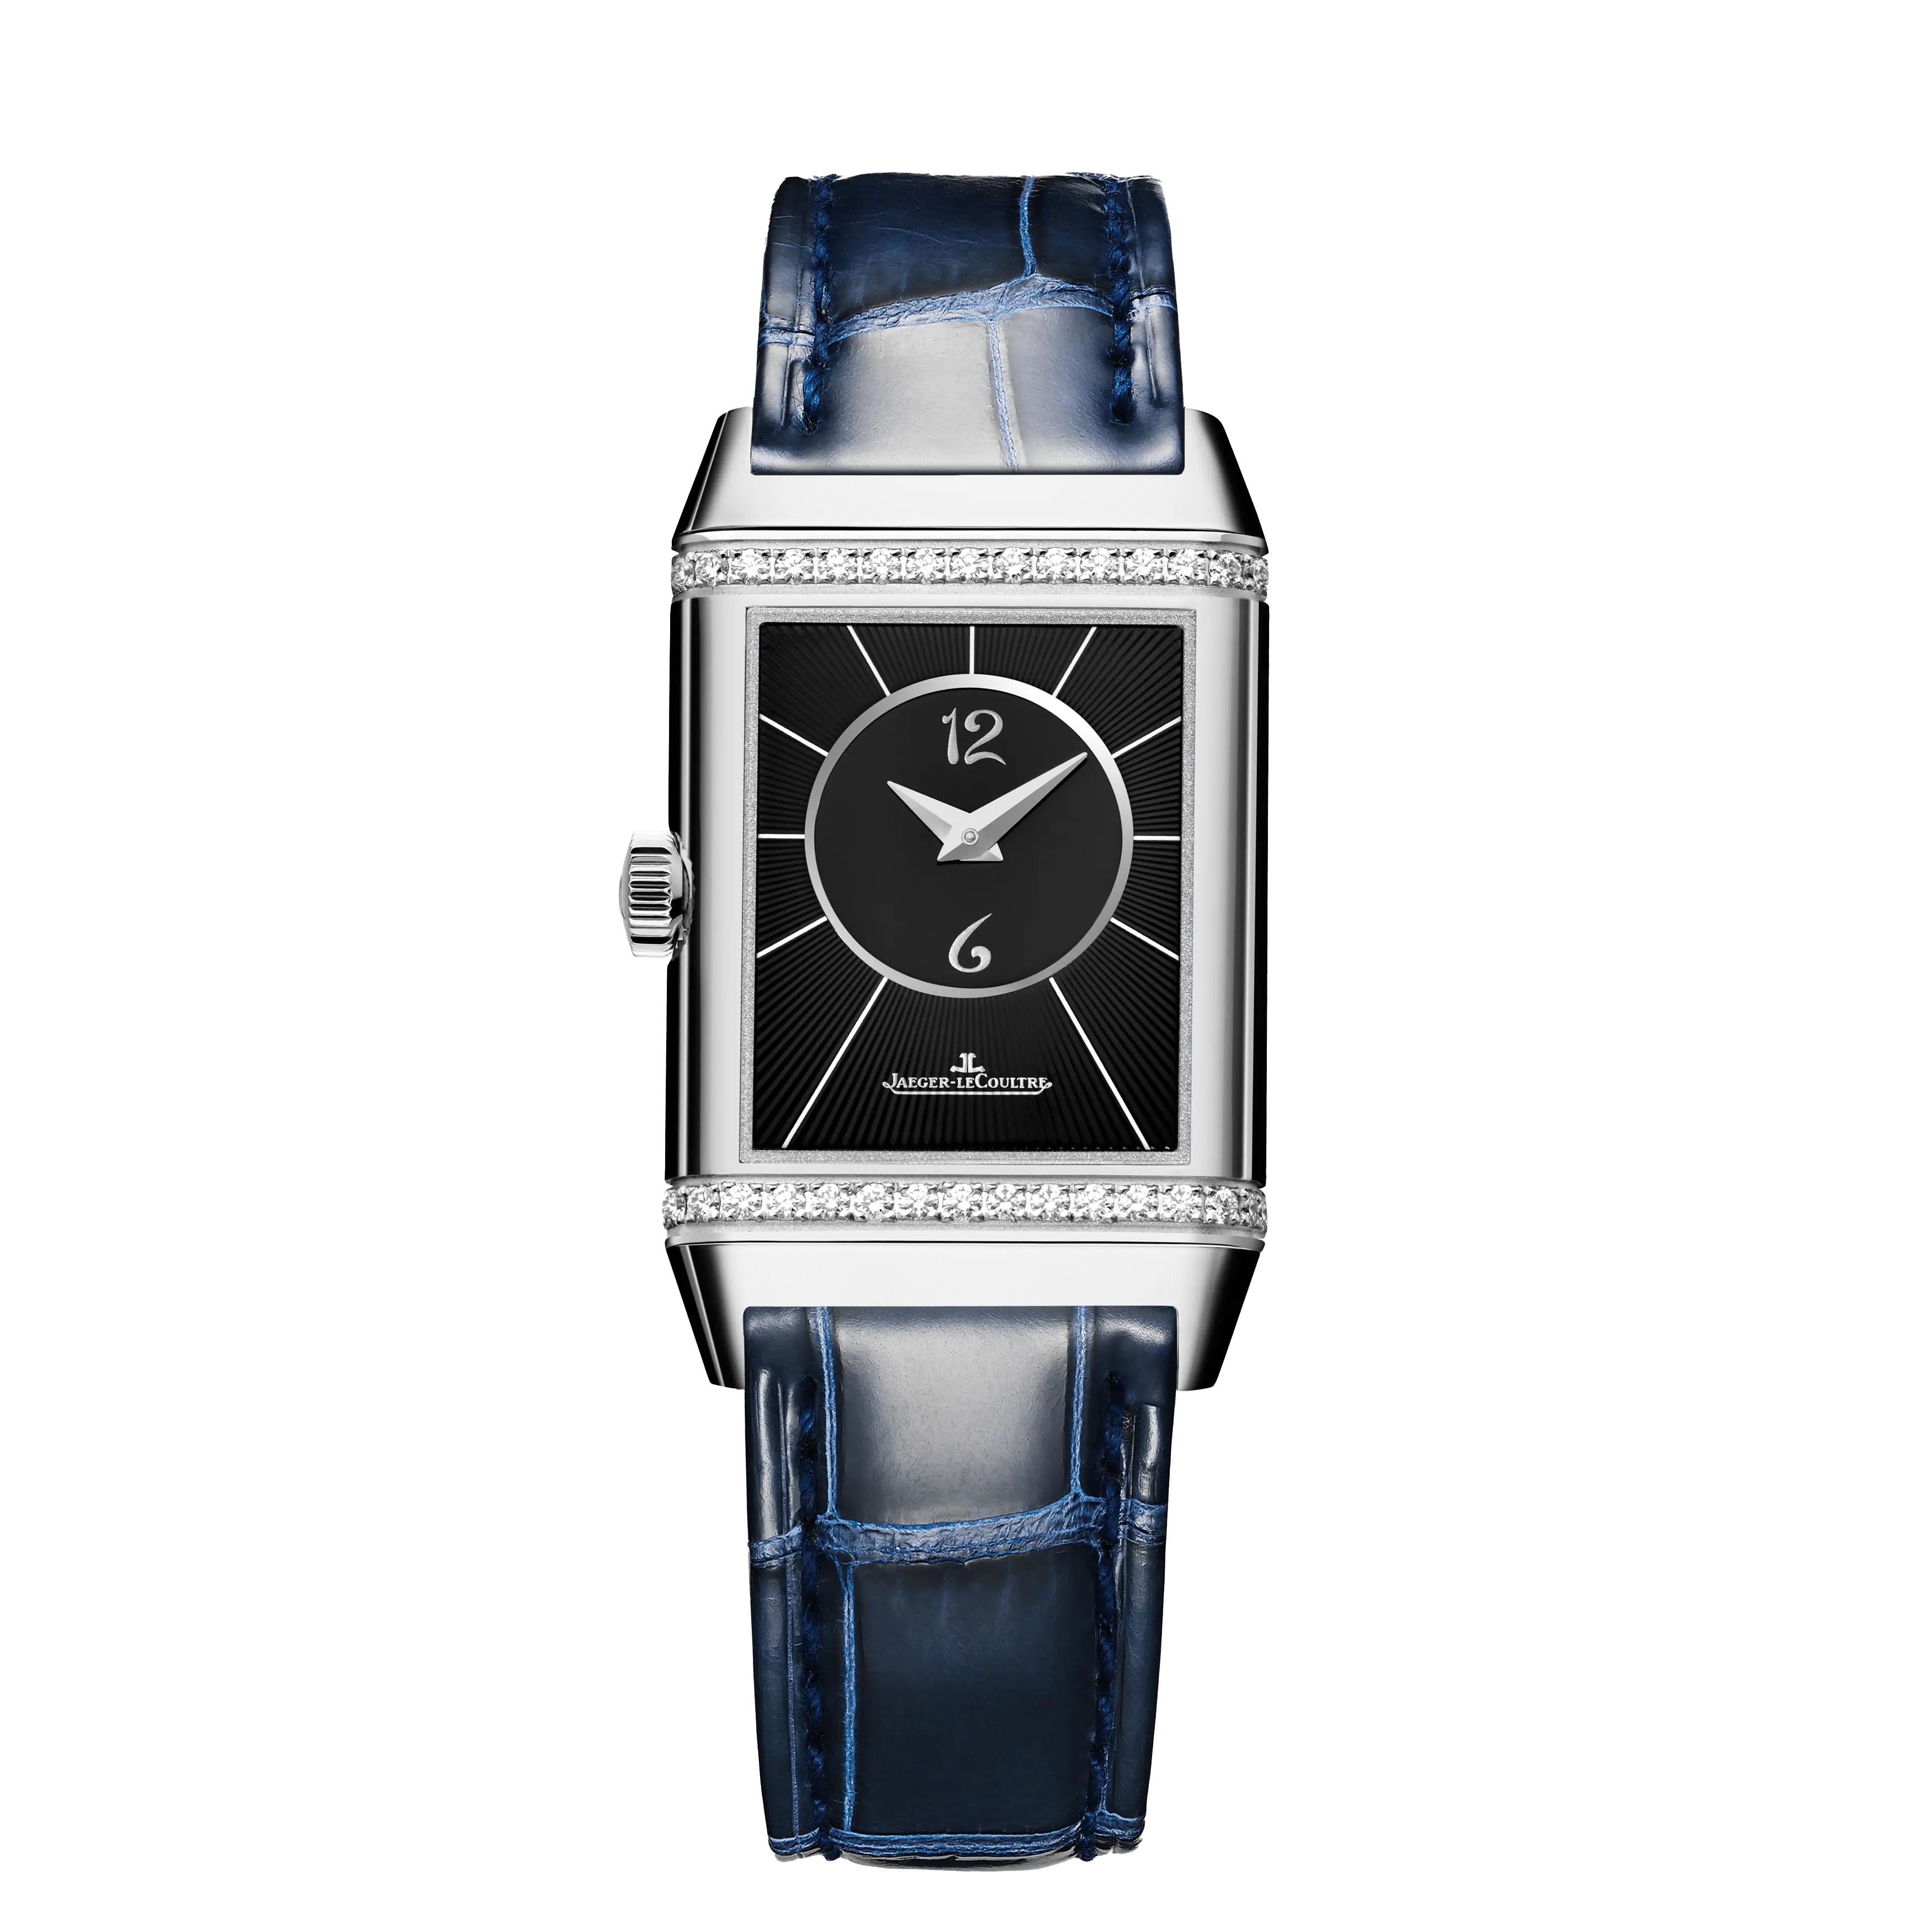 Jaeger-LeCoultre Reverso Classic Duetto Watch, 40x24mm Silver Dial, Q2588422